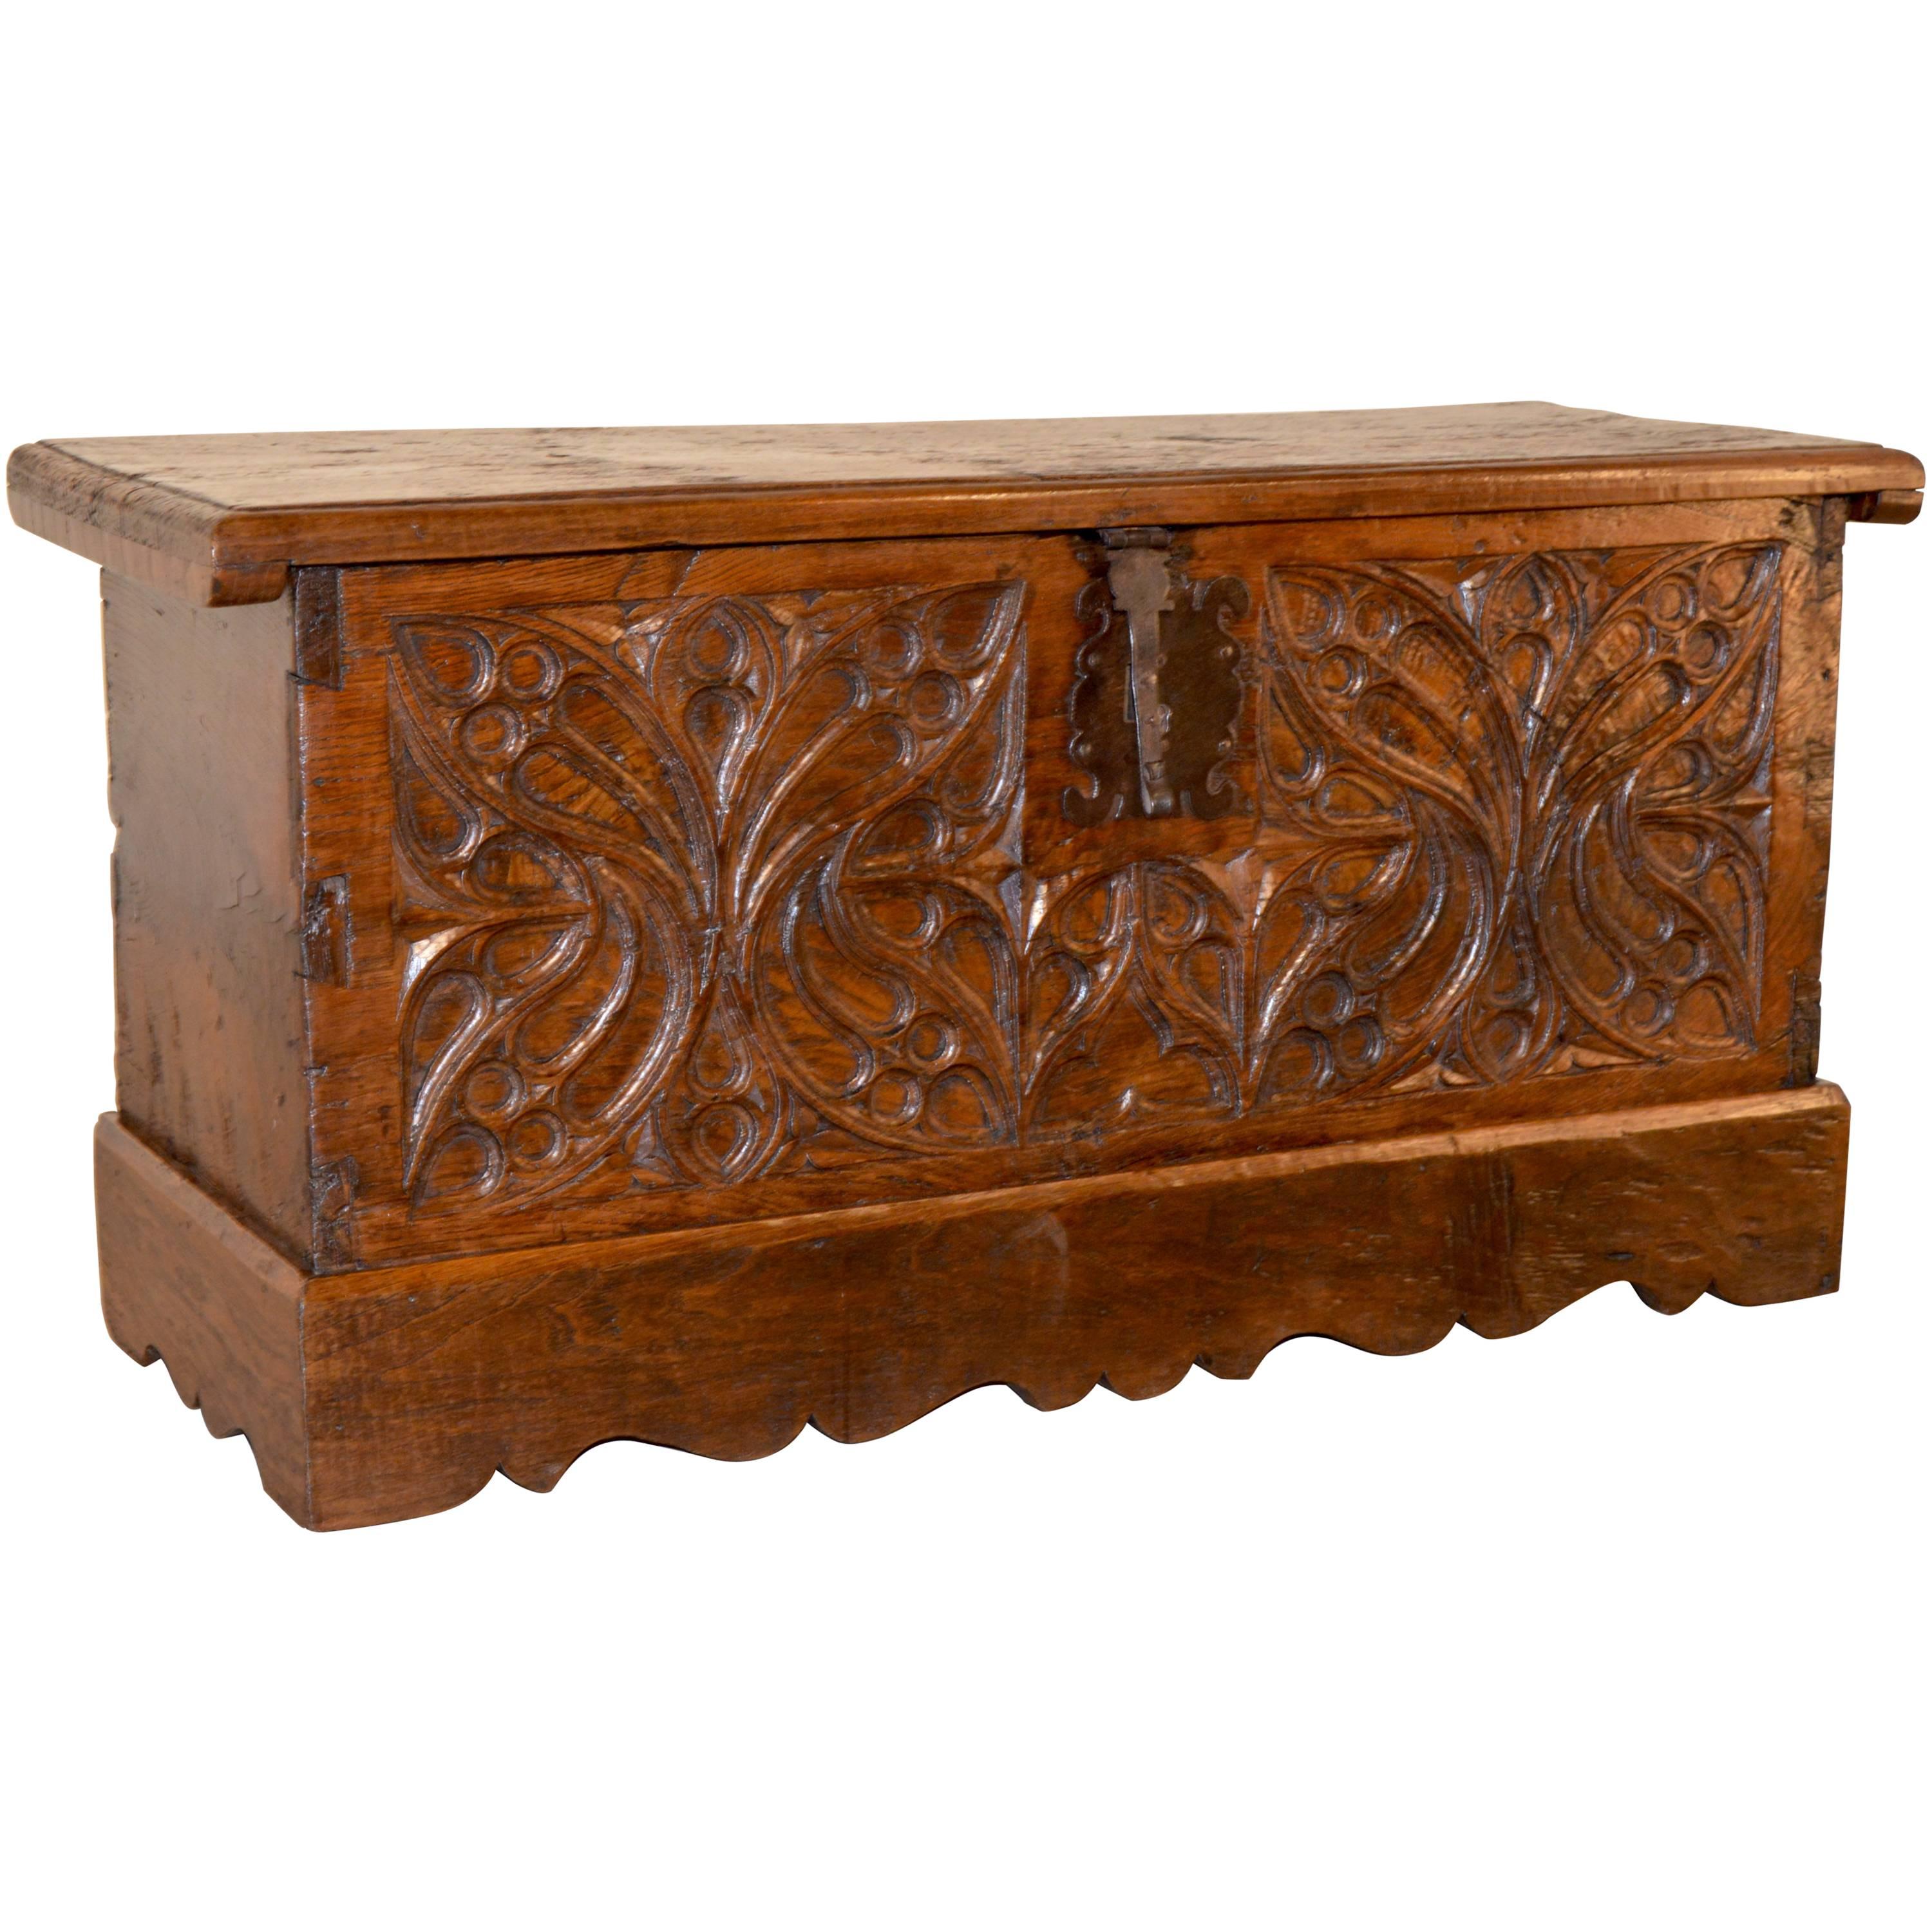 Early 17th Century French Walnut Blanket Chest